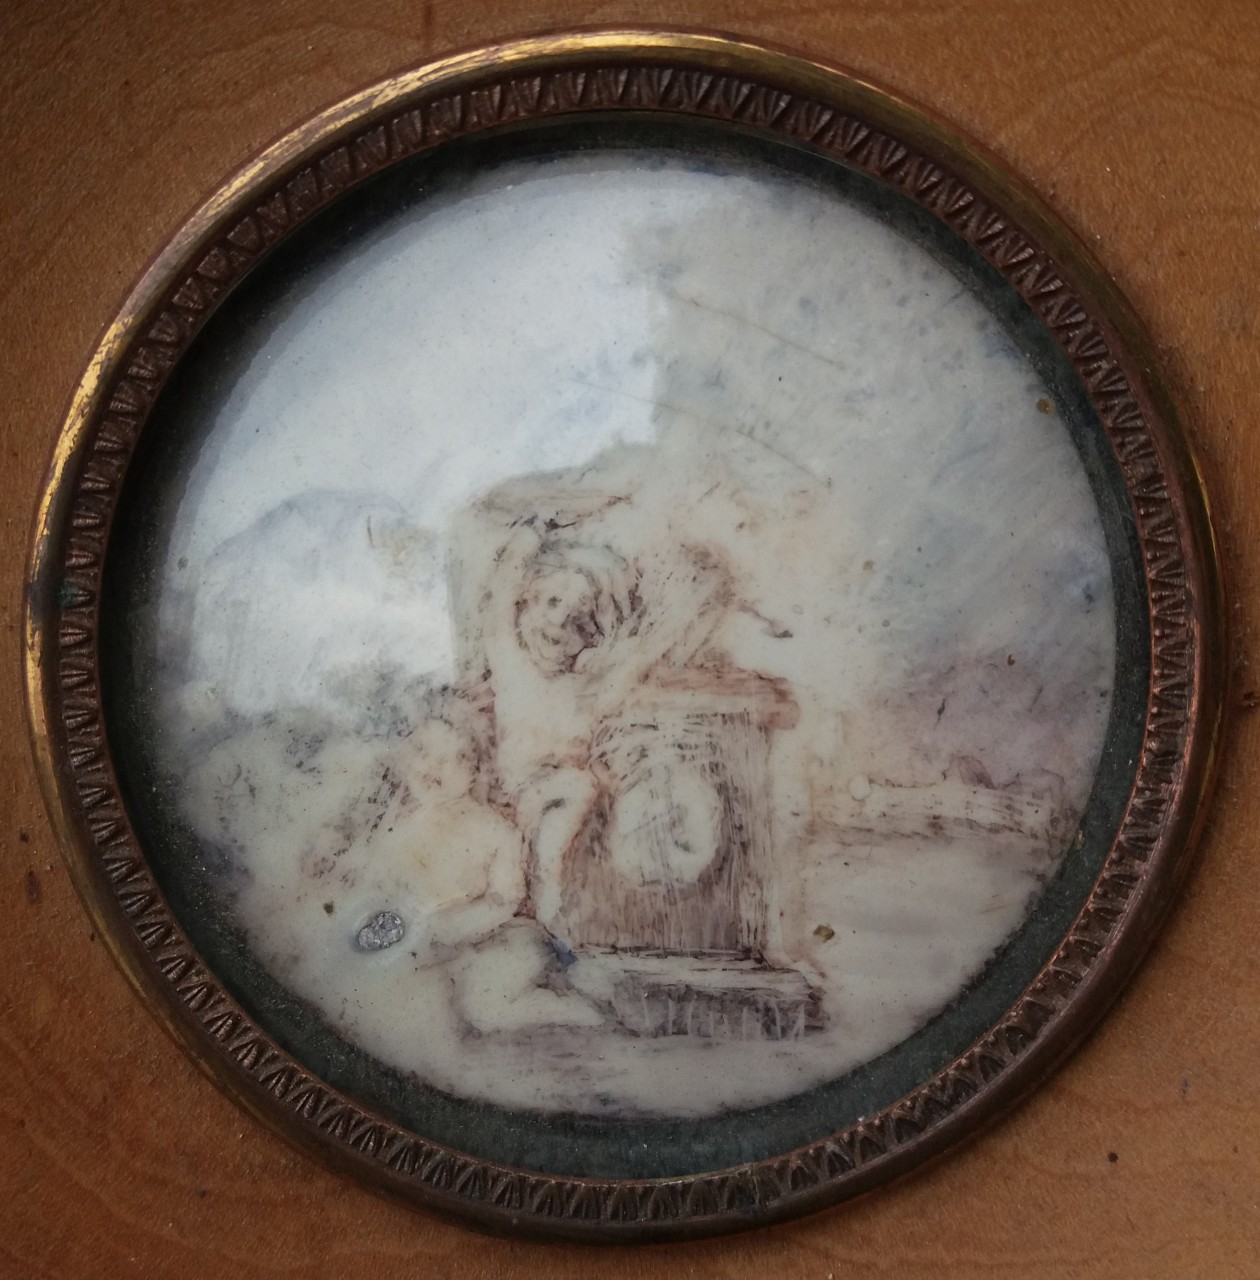 Watercolour on ivory - Allegorical scene with putti